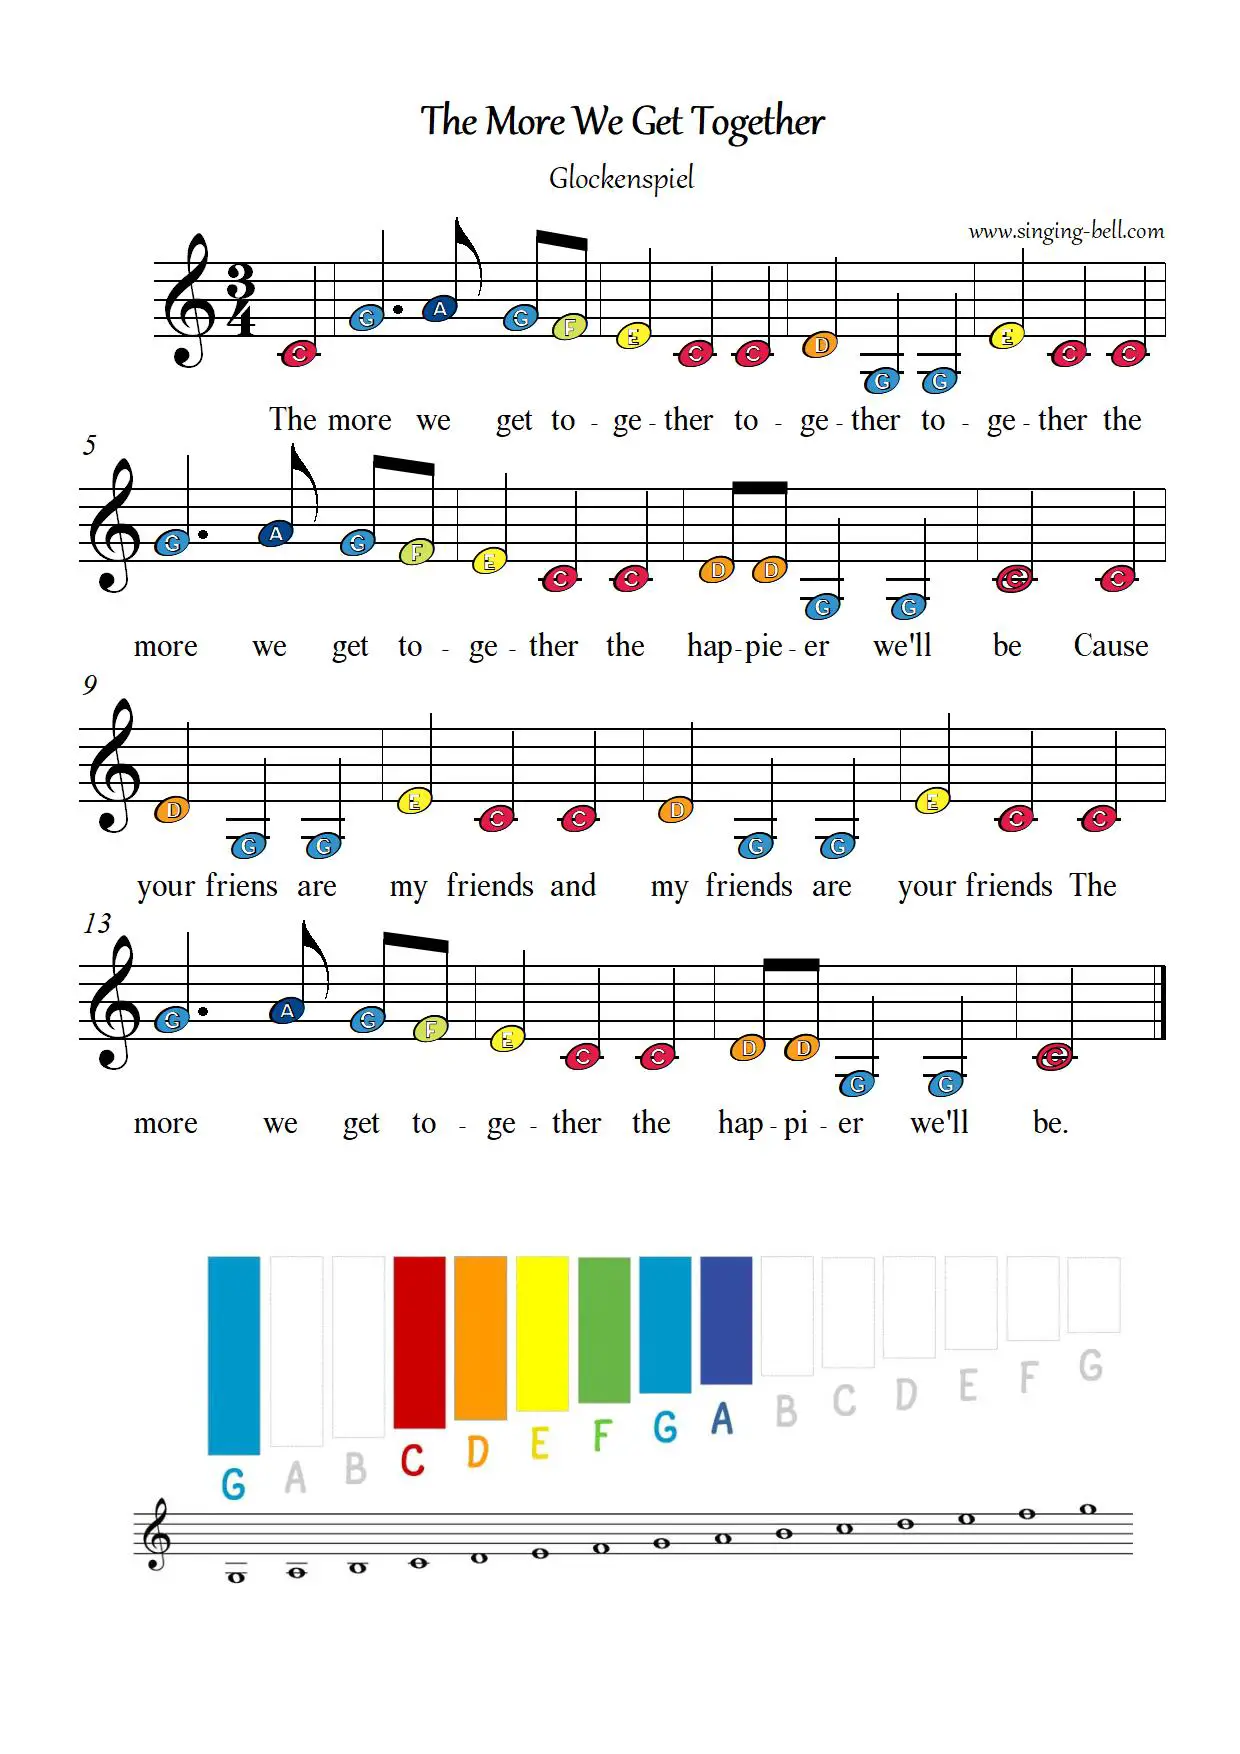 The more we get rogether_C free xylophone glockenspiel sheet music color notes chart pdf